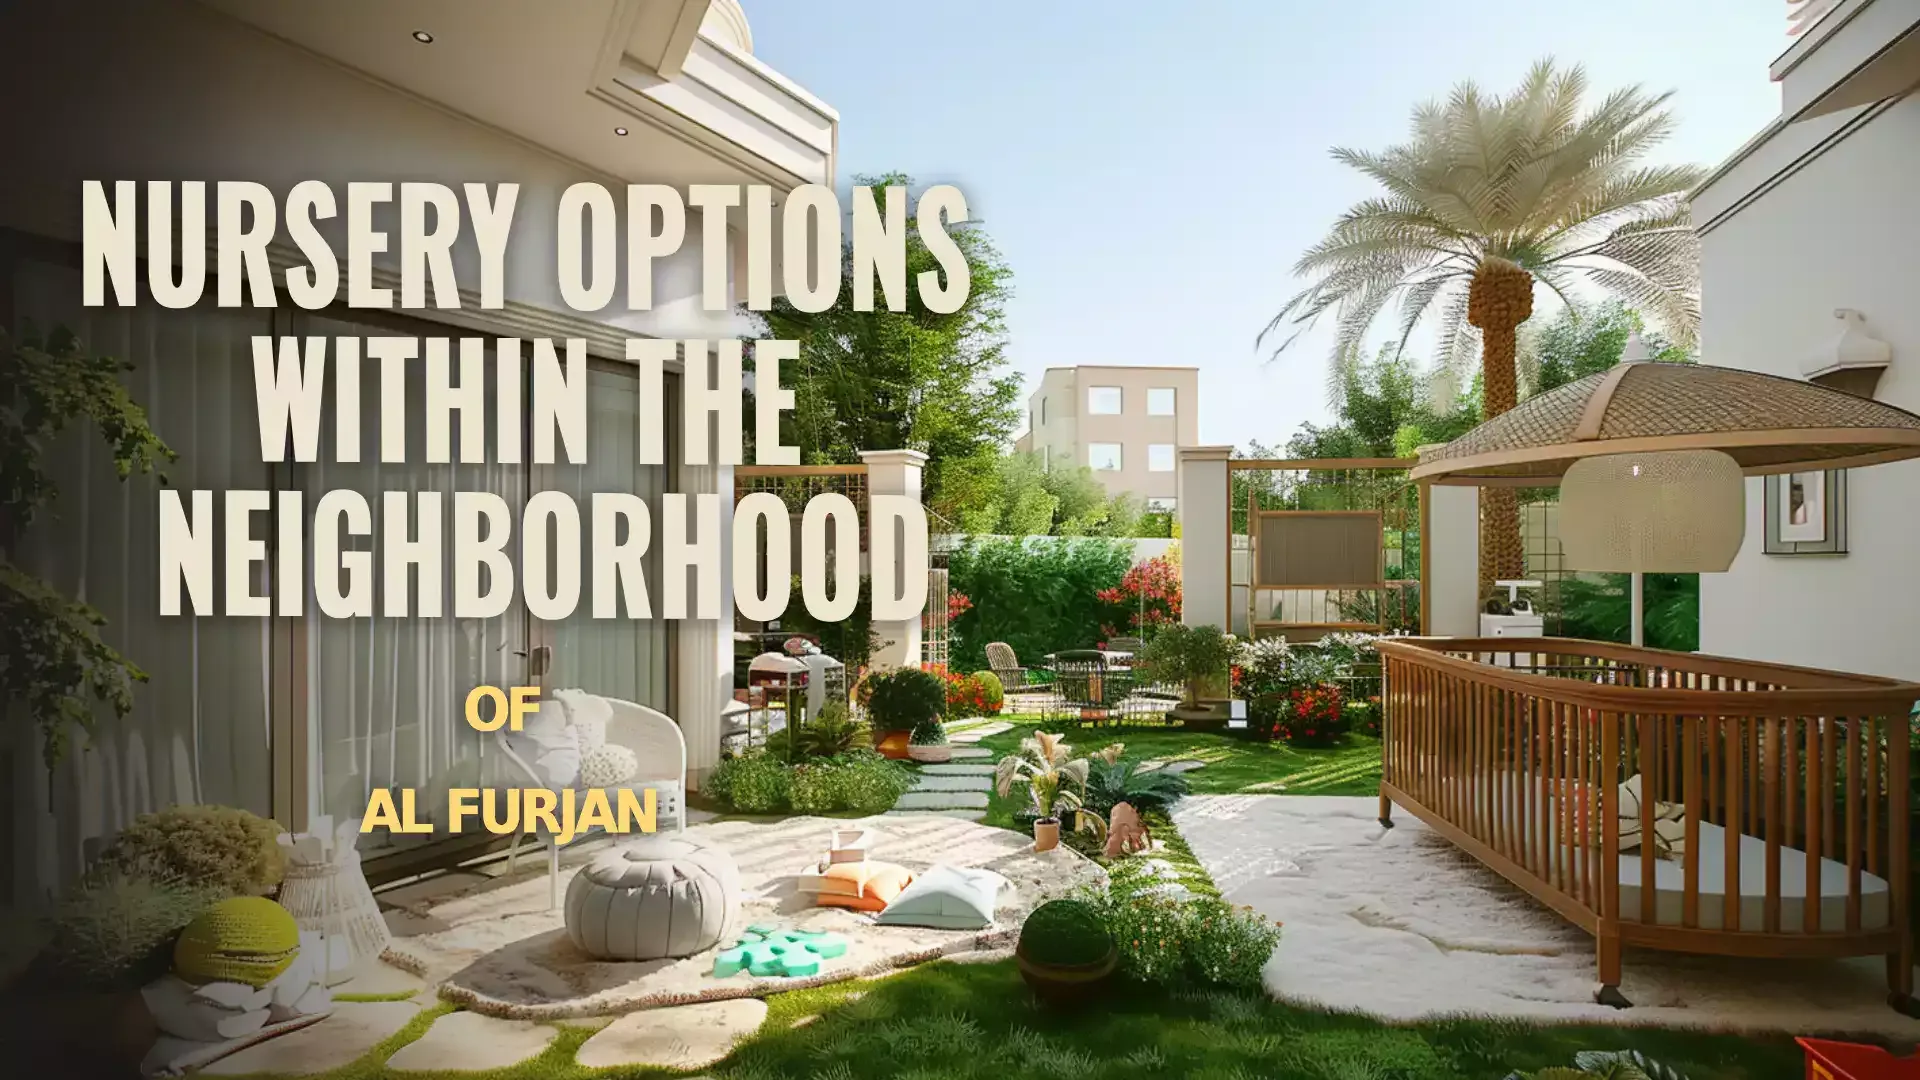 Al Furjan Nursery - Nurturing Growth and Learning for Young Minds